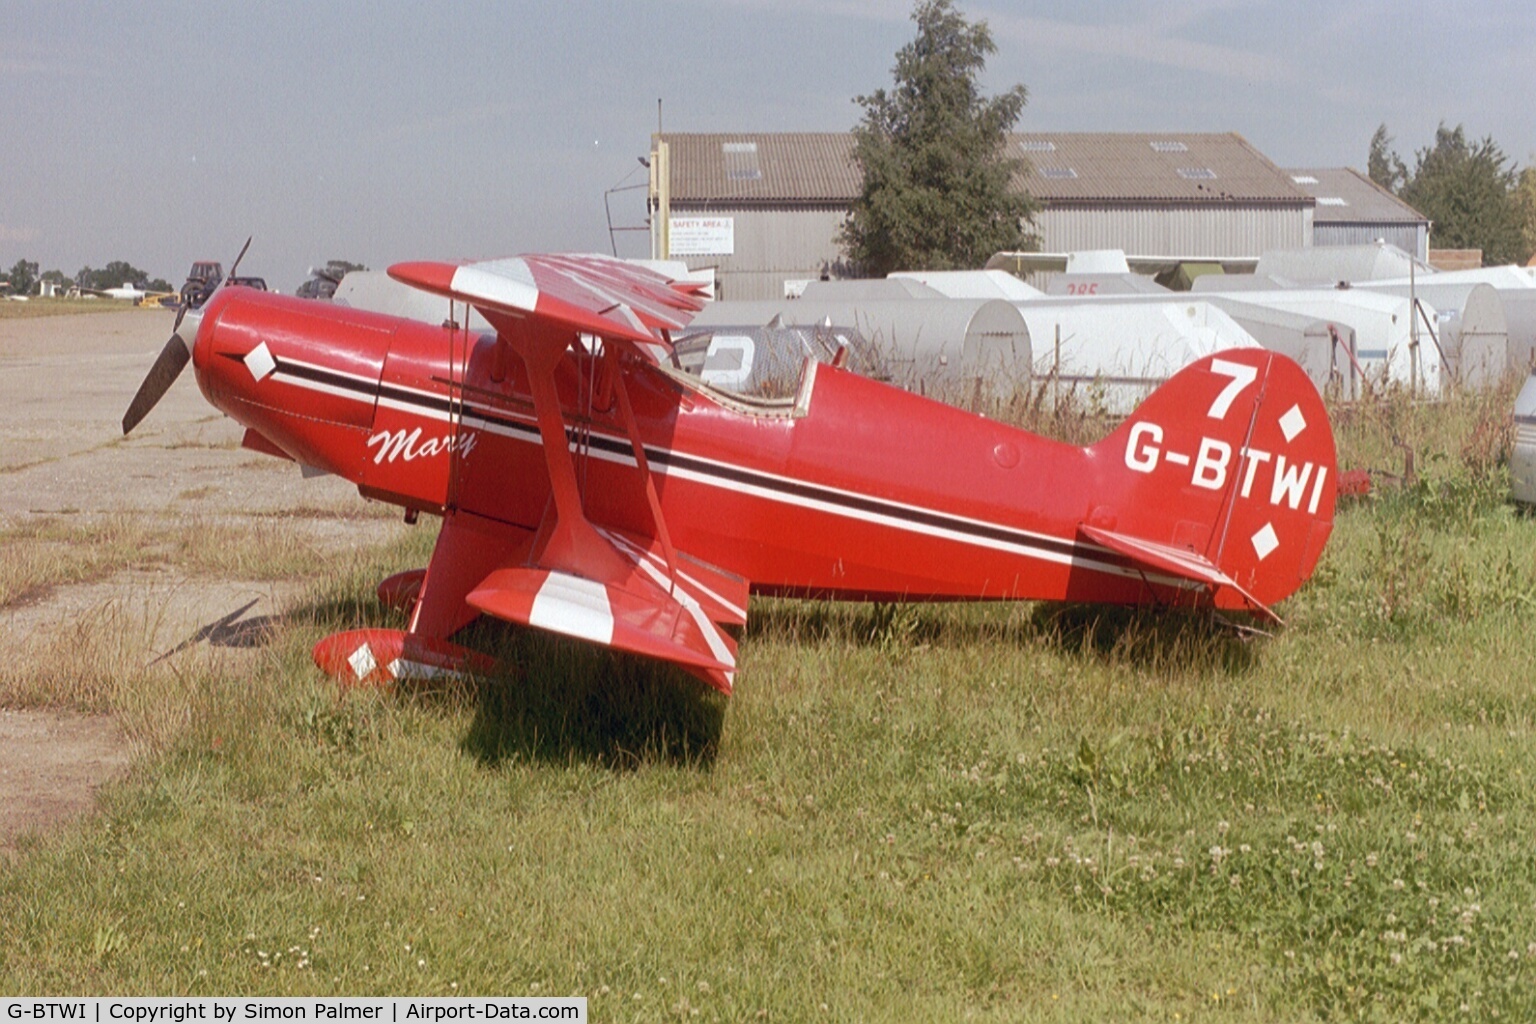 G-BTWI, 1976 EAA Acro Sport I C/N 230, Pitts Special at Husbands Bosworth airfield